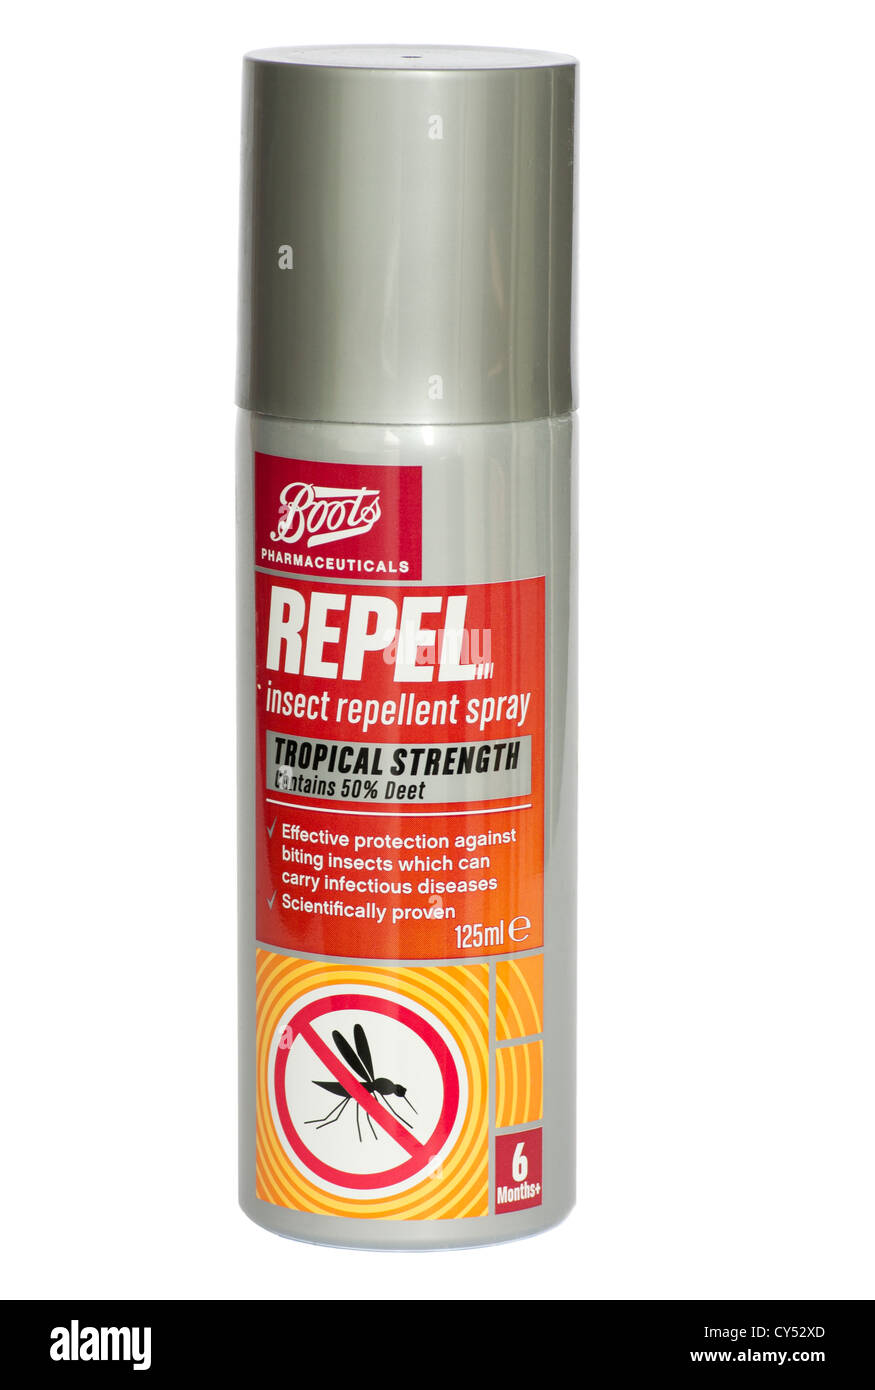 Aerosol Spay Can Of Boots Repel Insect Repellent Spray Stock Photo